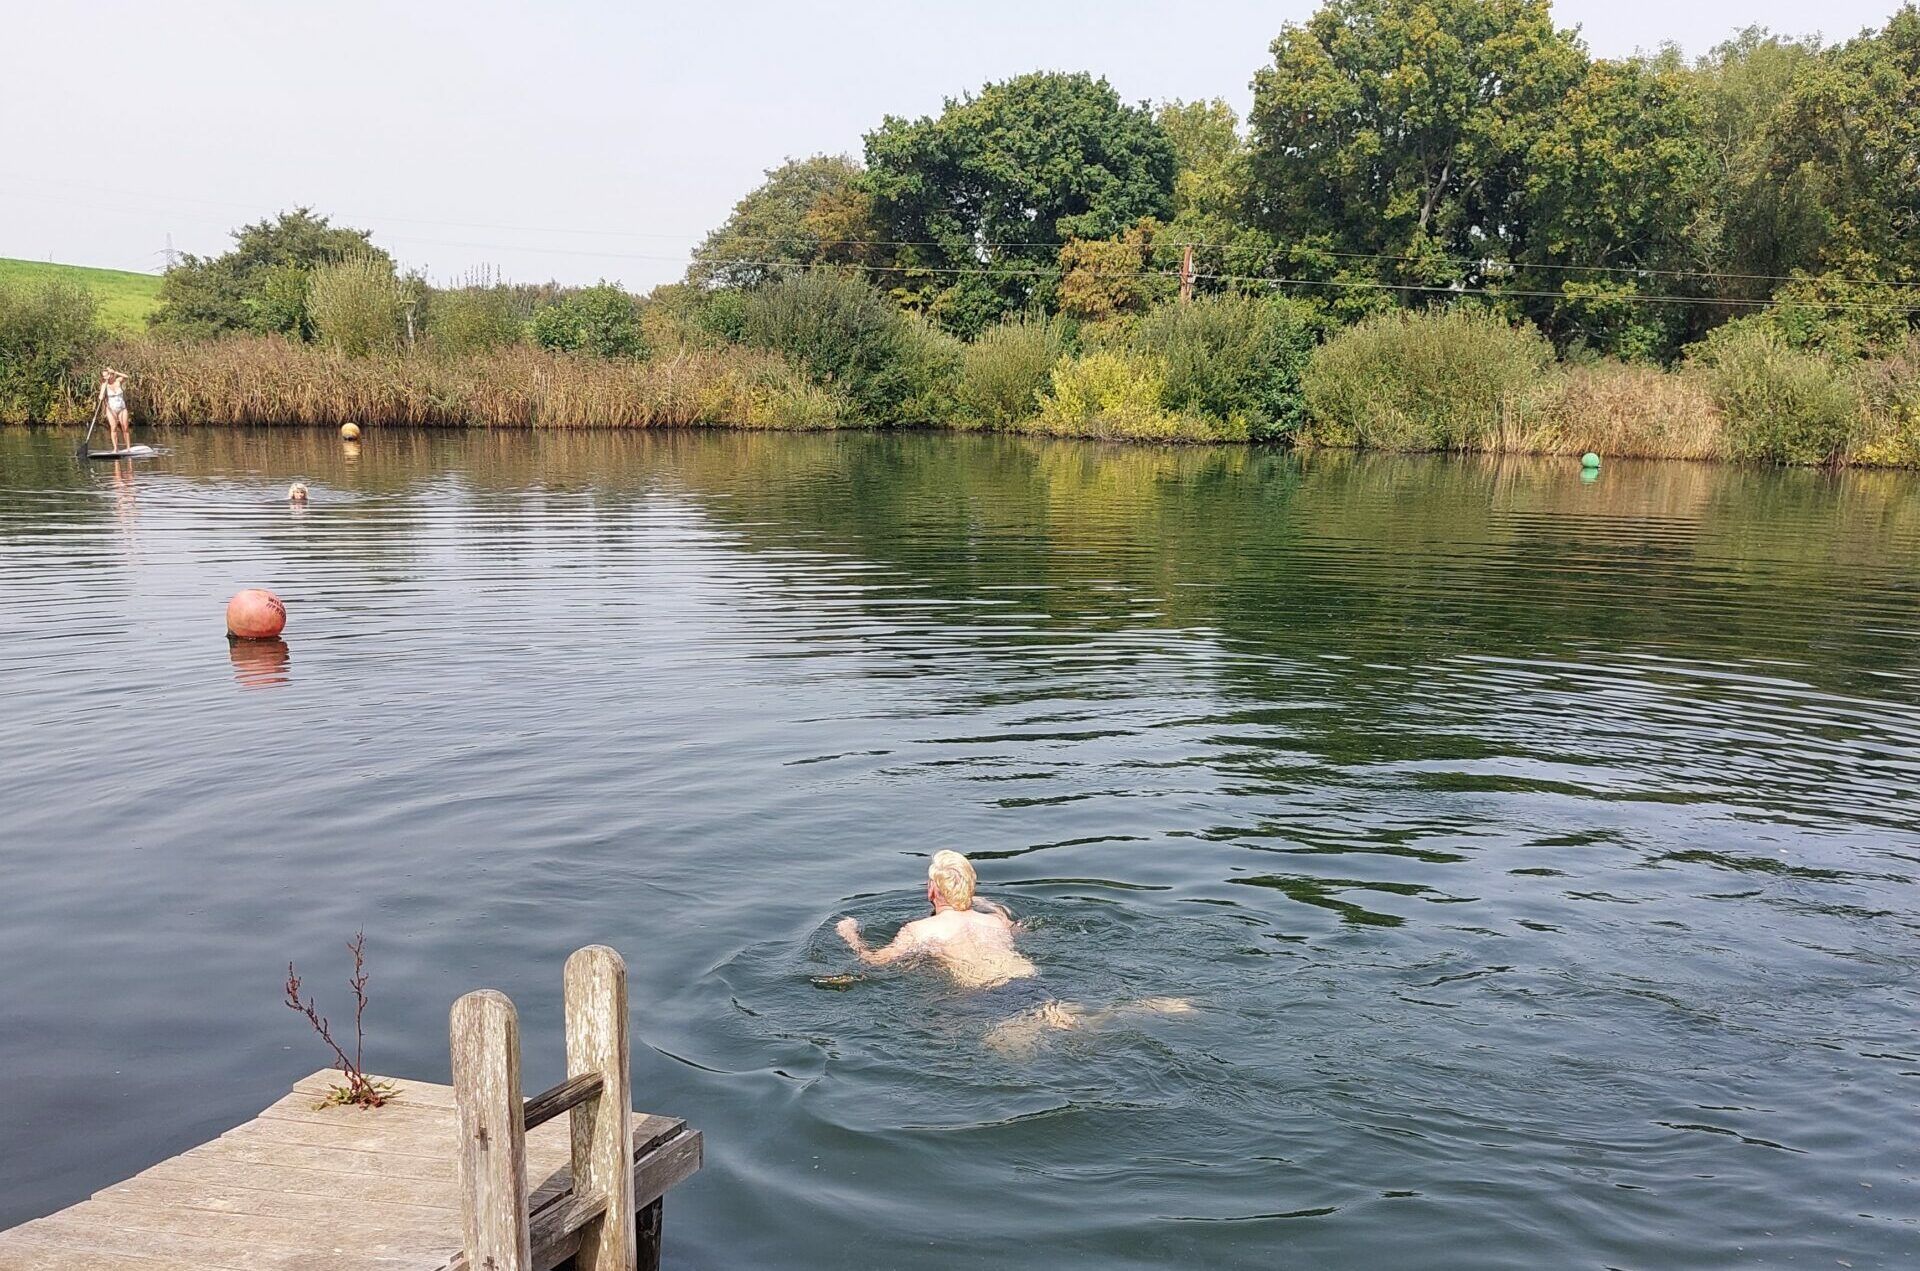 Rhys swimming in the late at the secret vineyard. Wellness in the Wild at The Secret Vineyard